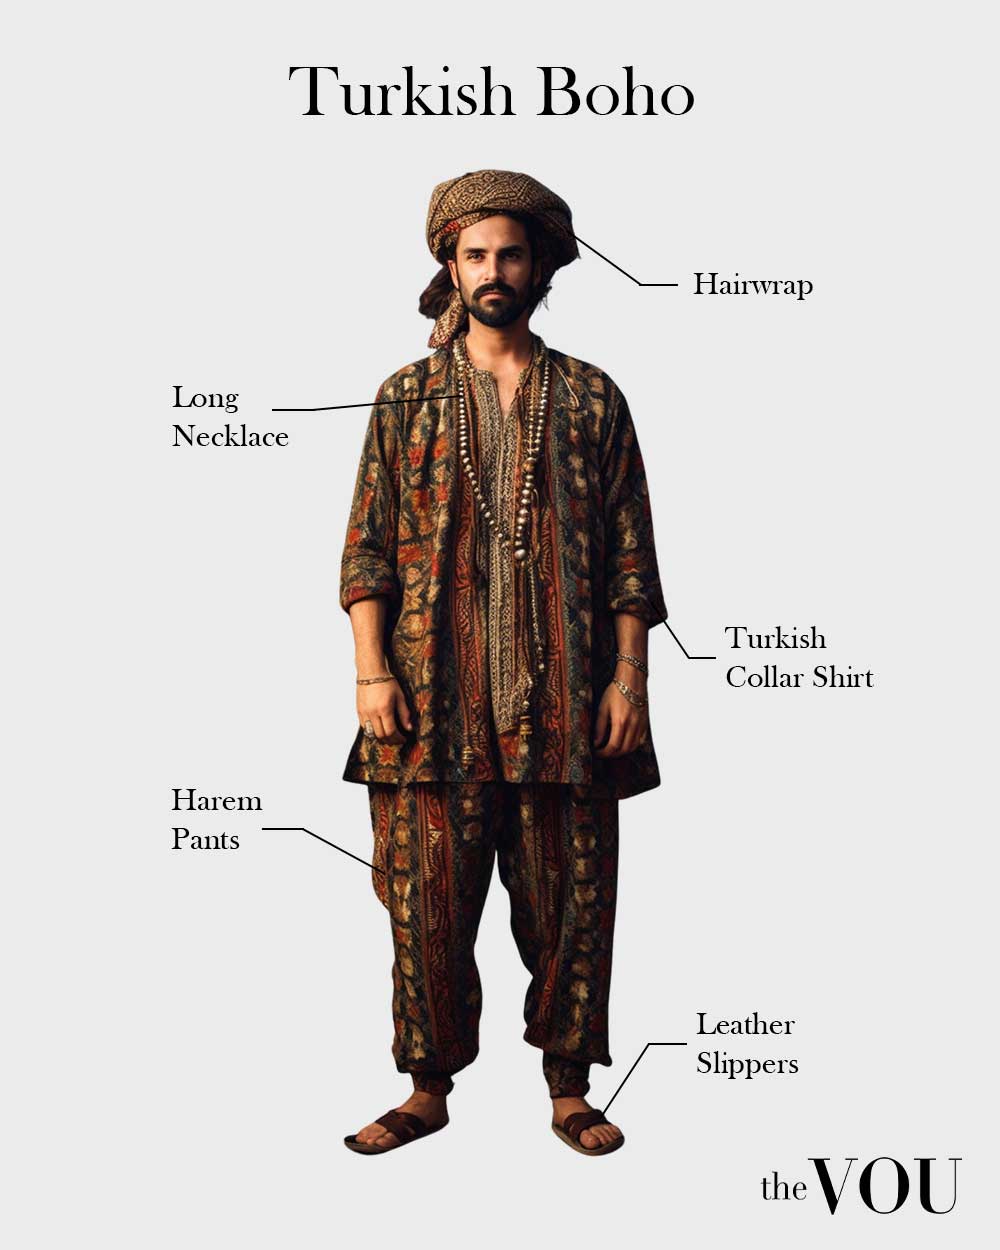 turkish boho outfit for men